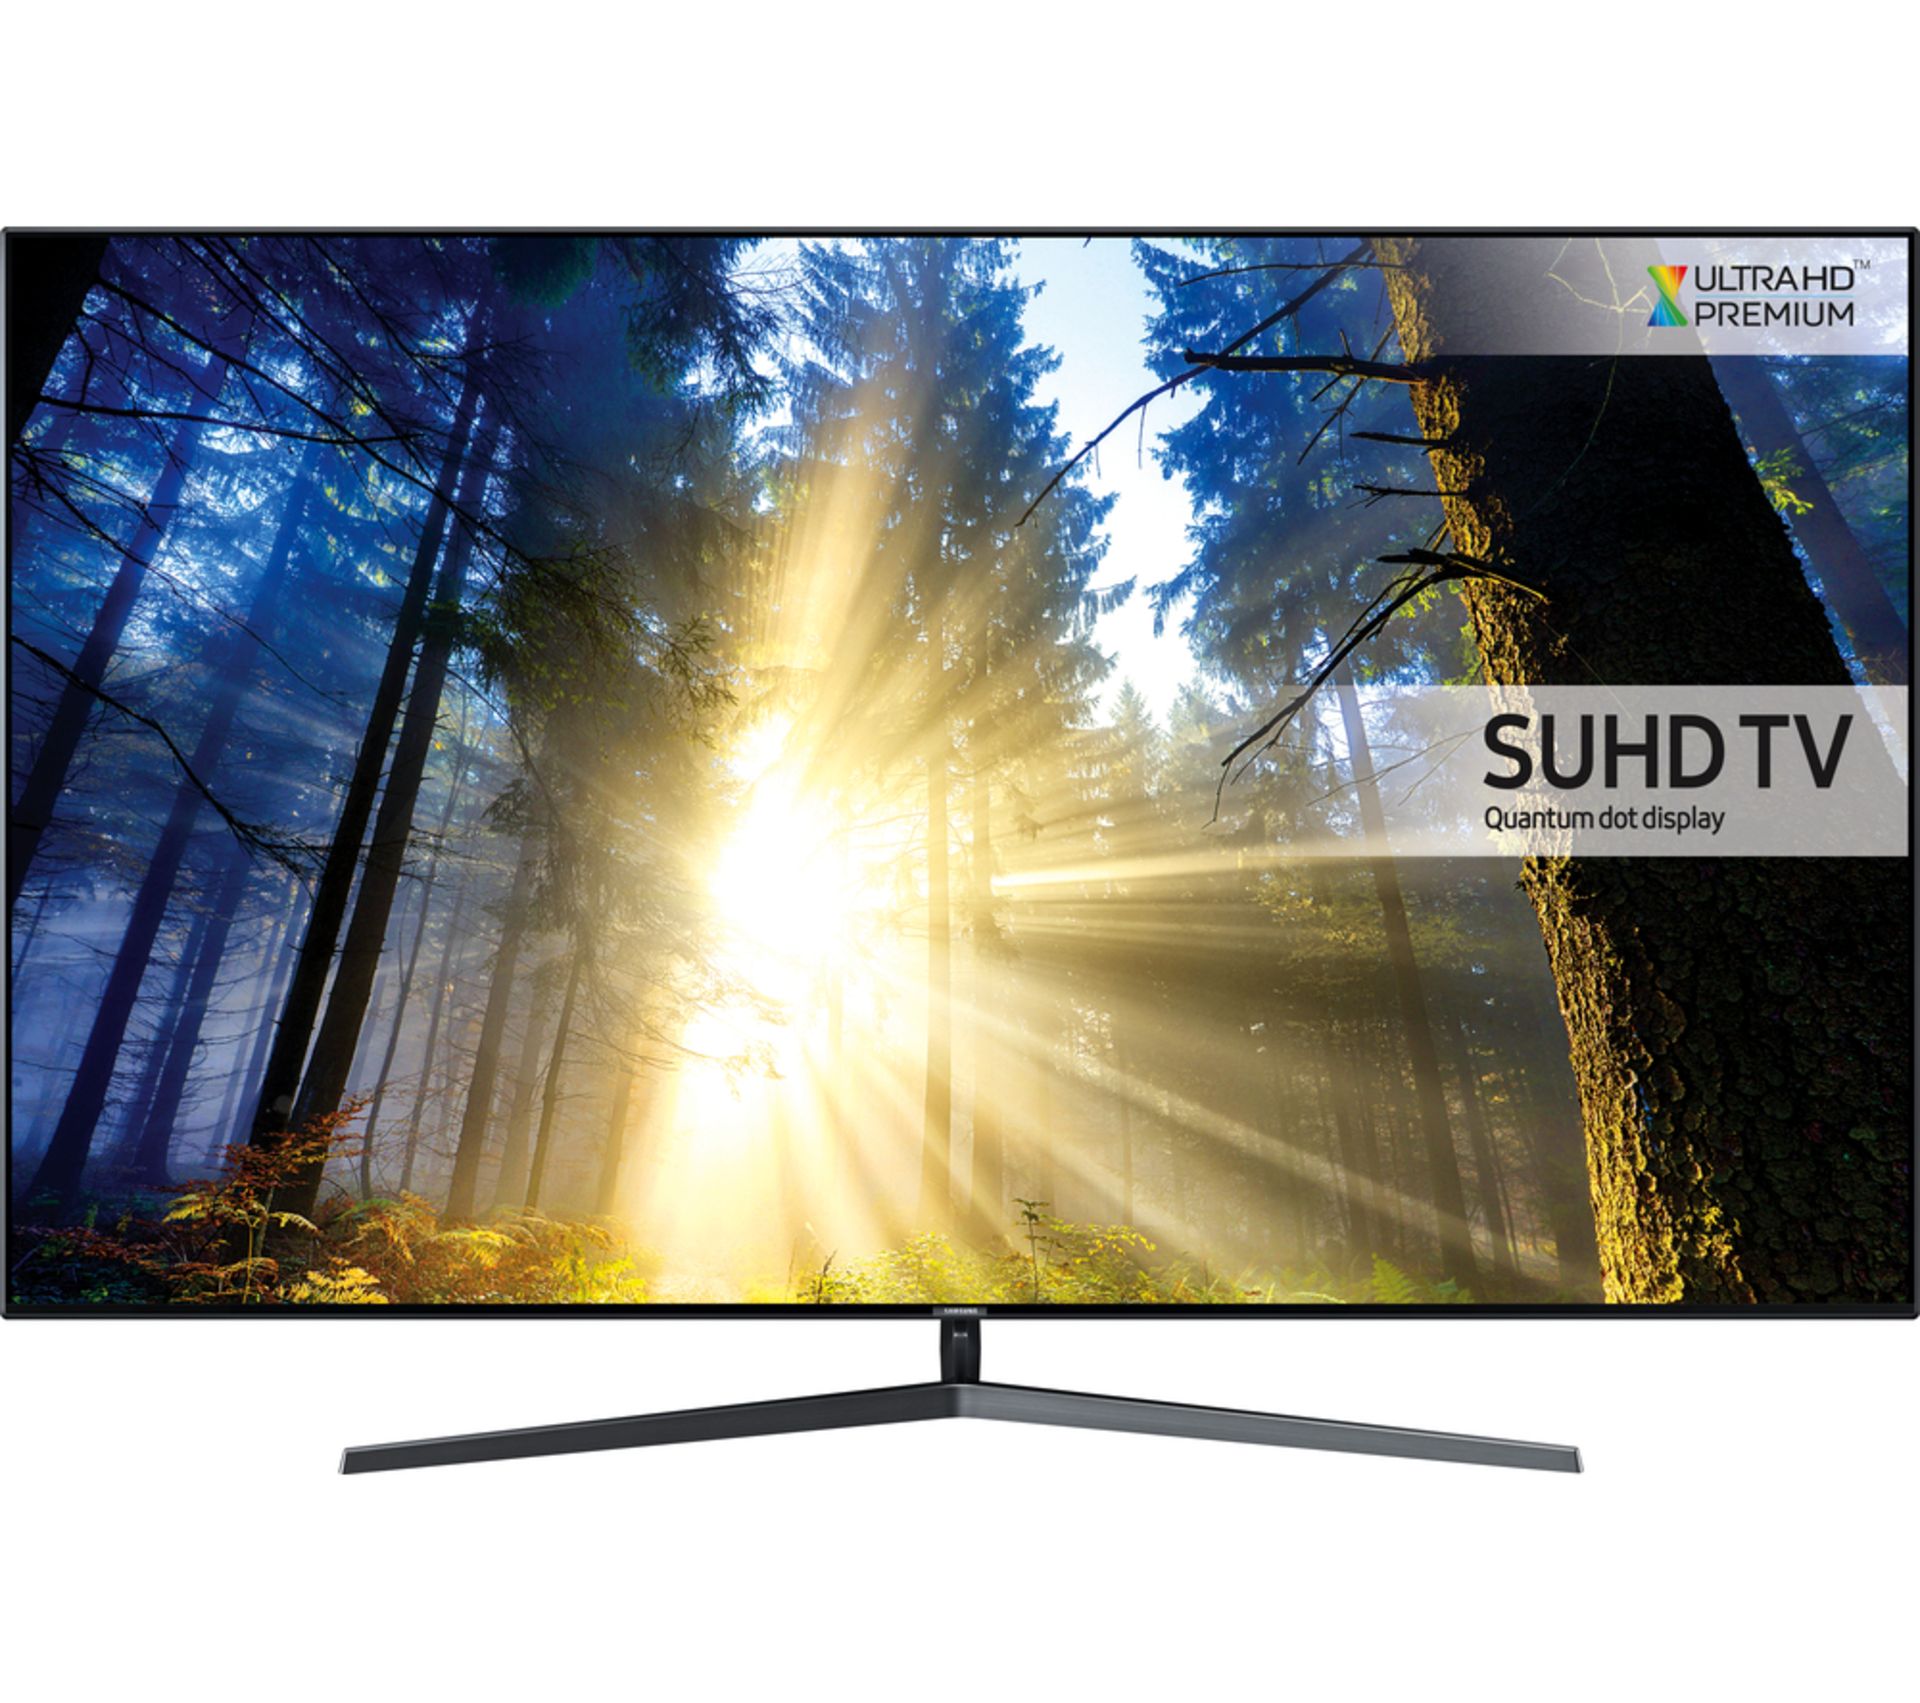 SAMSUNG UE49KS8000 Smart 4k Ultra HD HDR 49" LED TV. RRP £1,399. 4k Ultra HD picture is up to 4 - Image 4 of 4